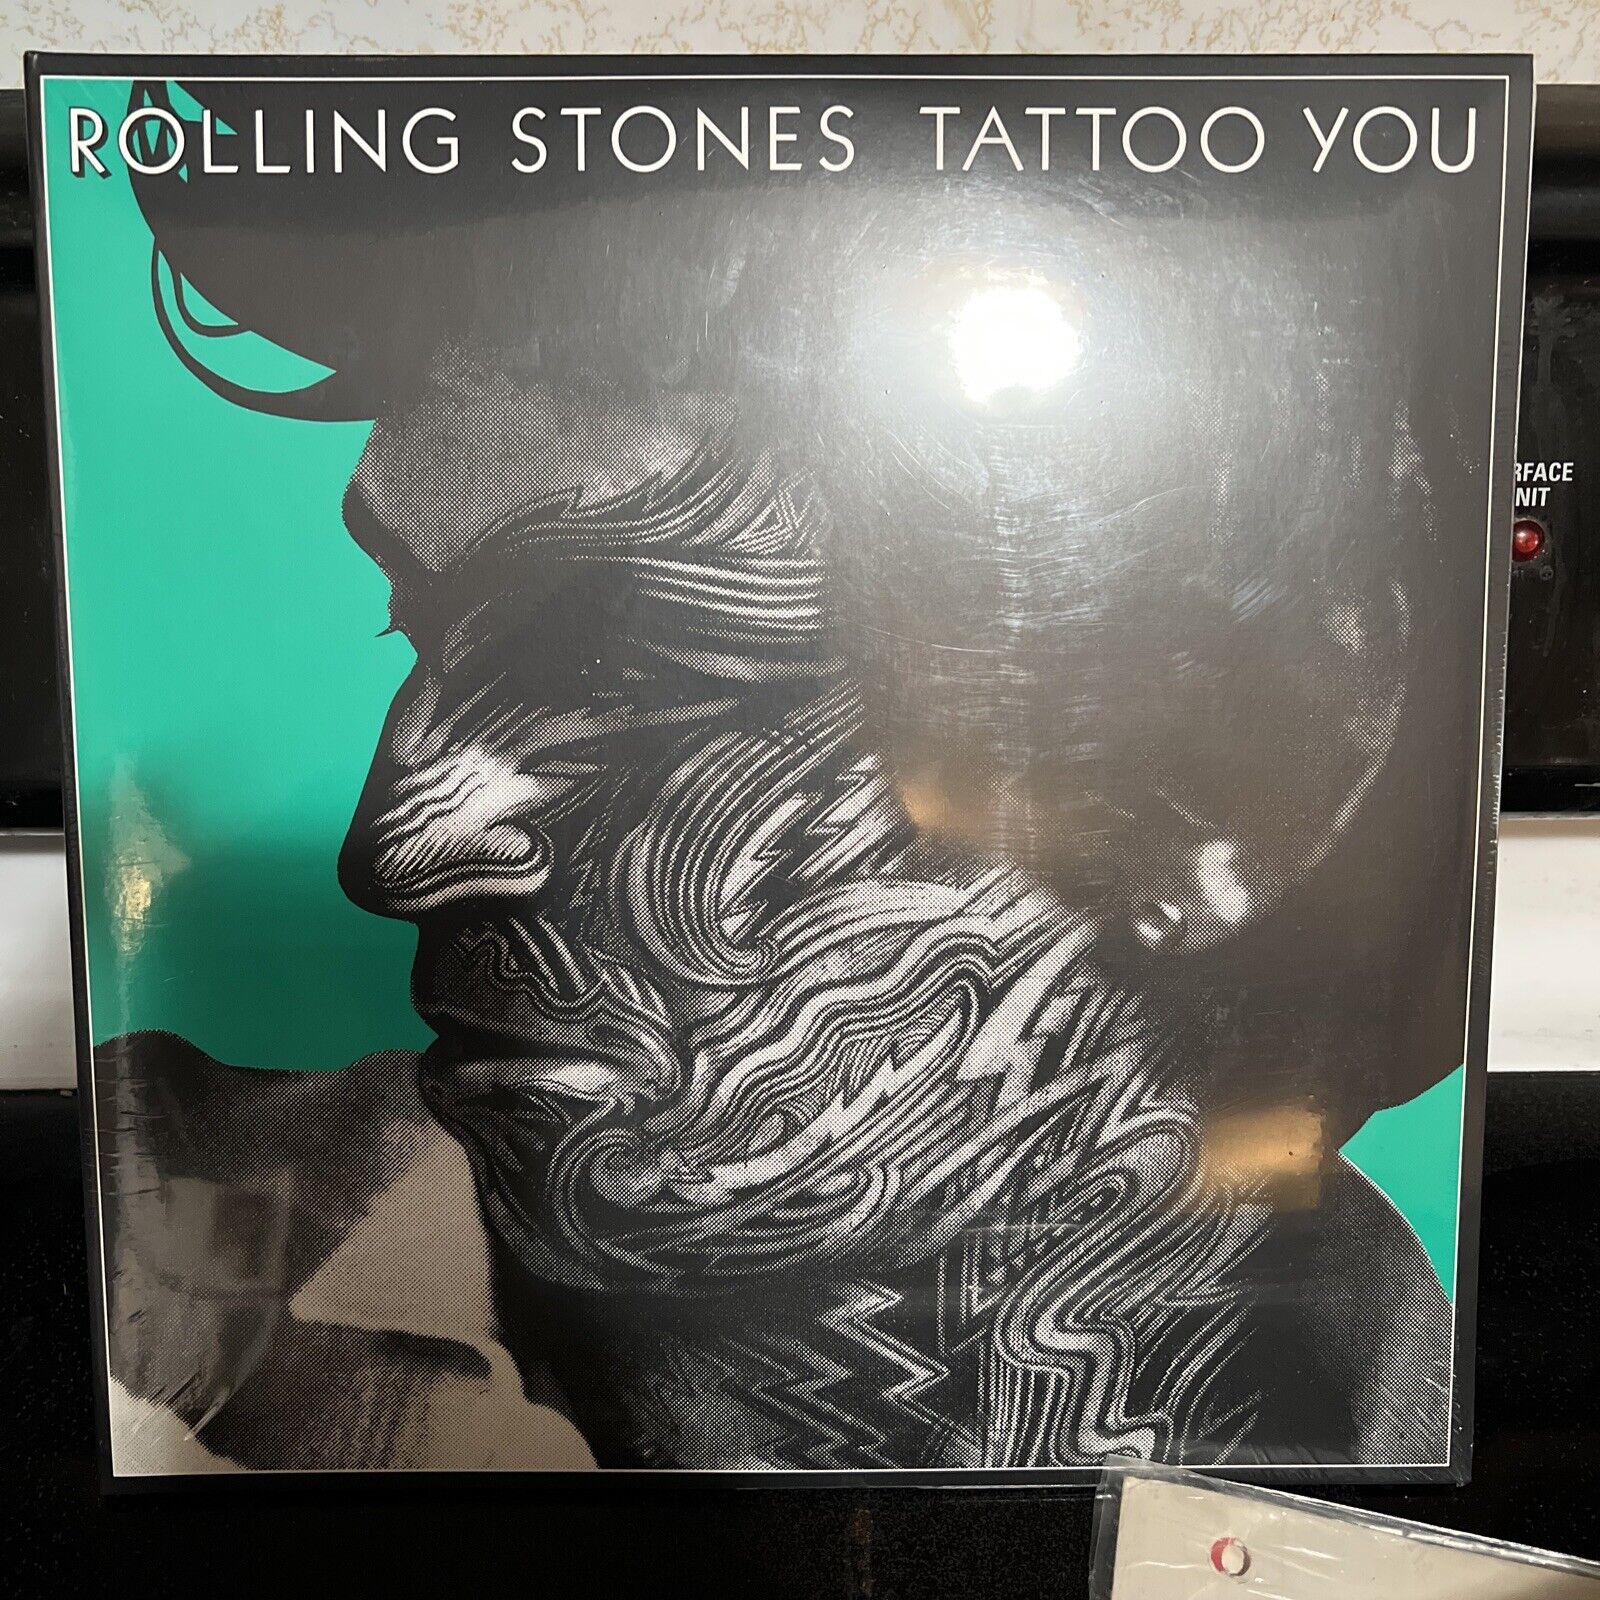 Tattoo You (Limited Edition) (Clear Vinyl) (Alt. Cover) by The Rolling Stones...